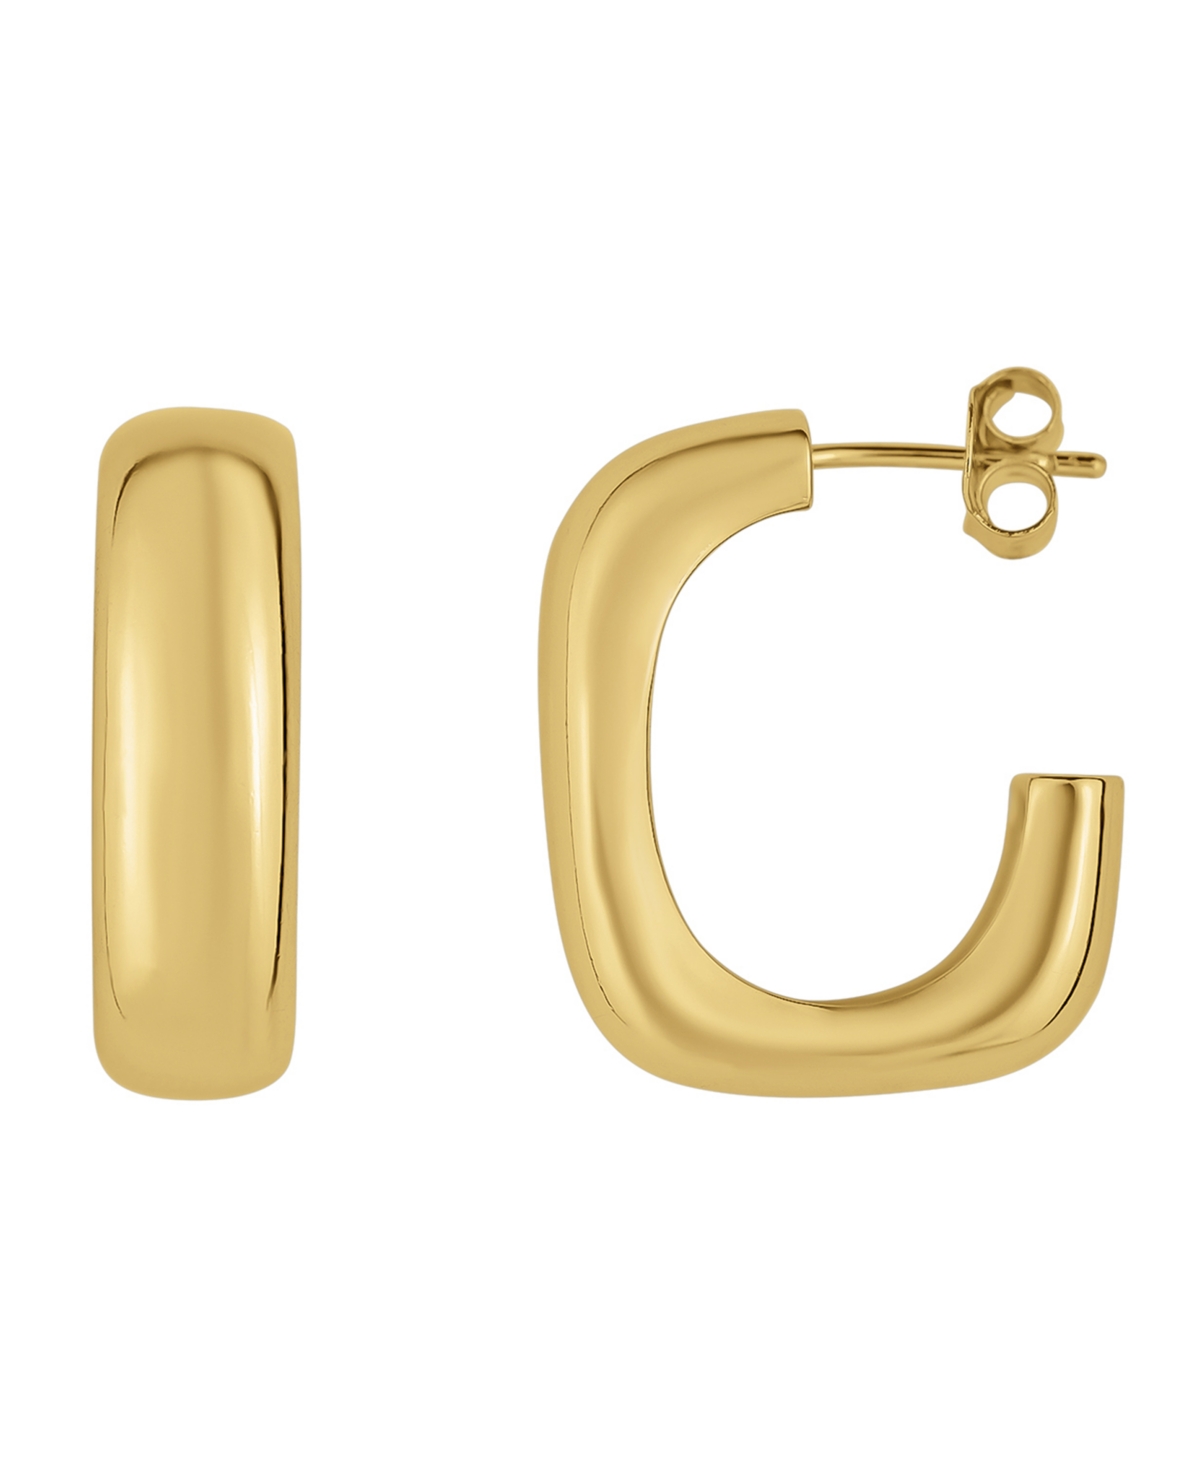 And Now This 18k Gold Plated Hoop Earring In K Gold Plated Over Brass